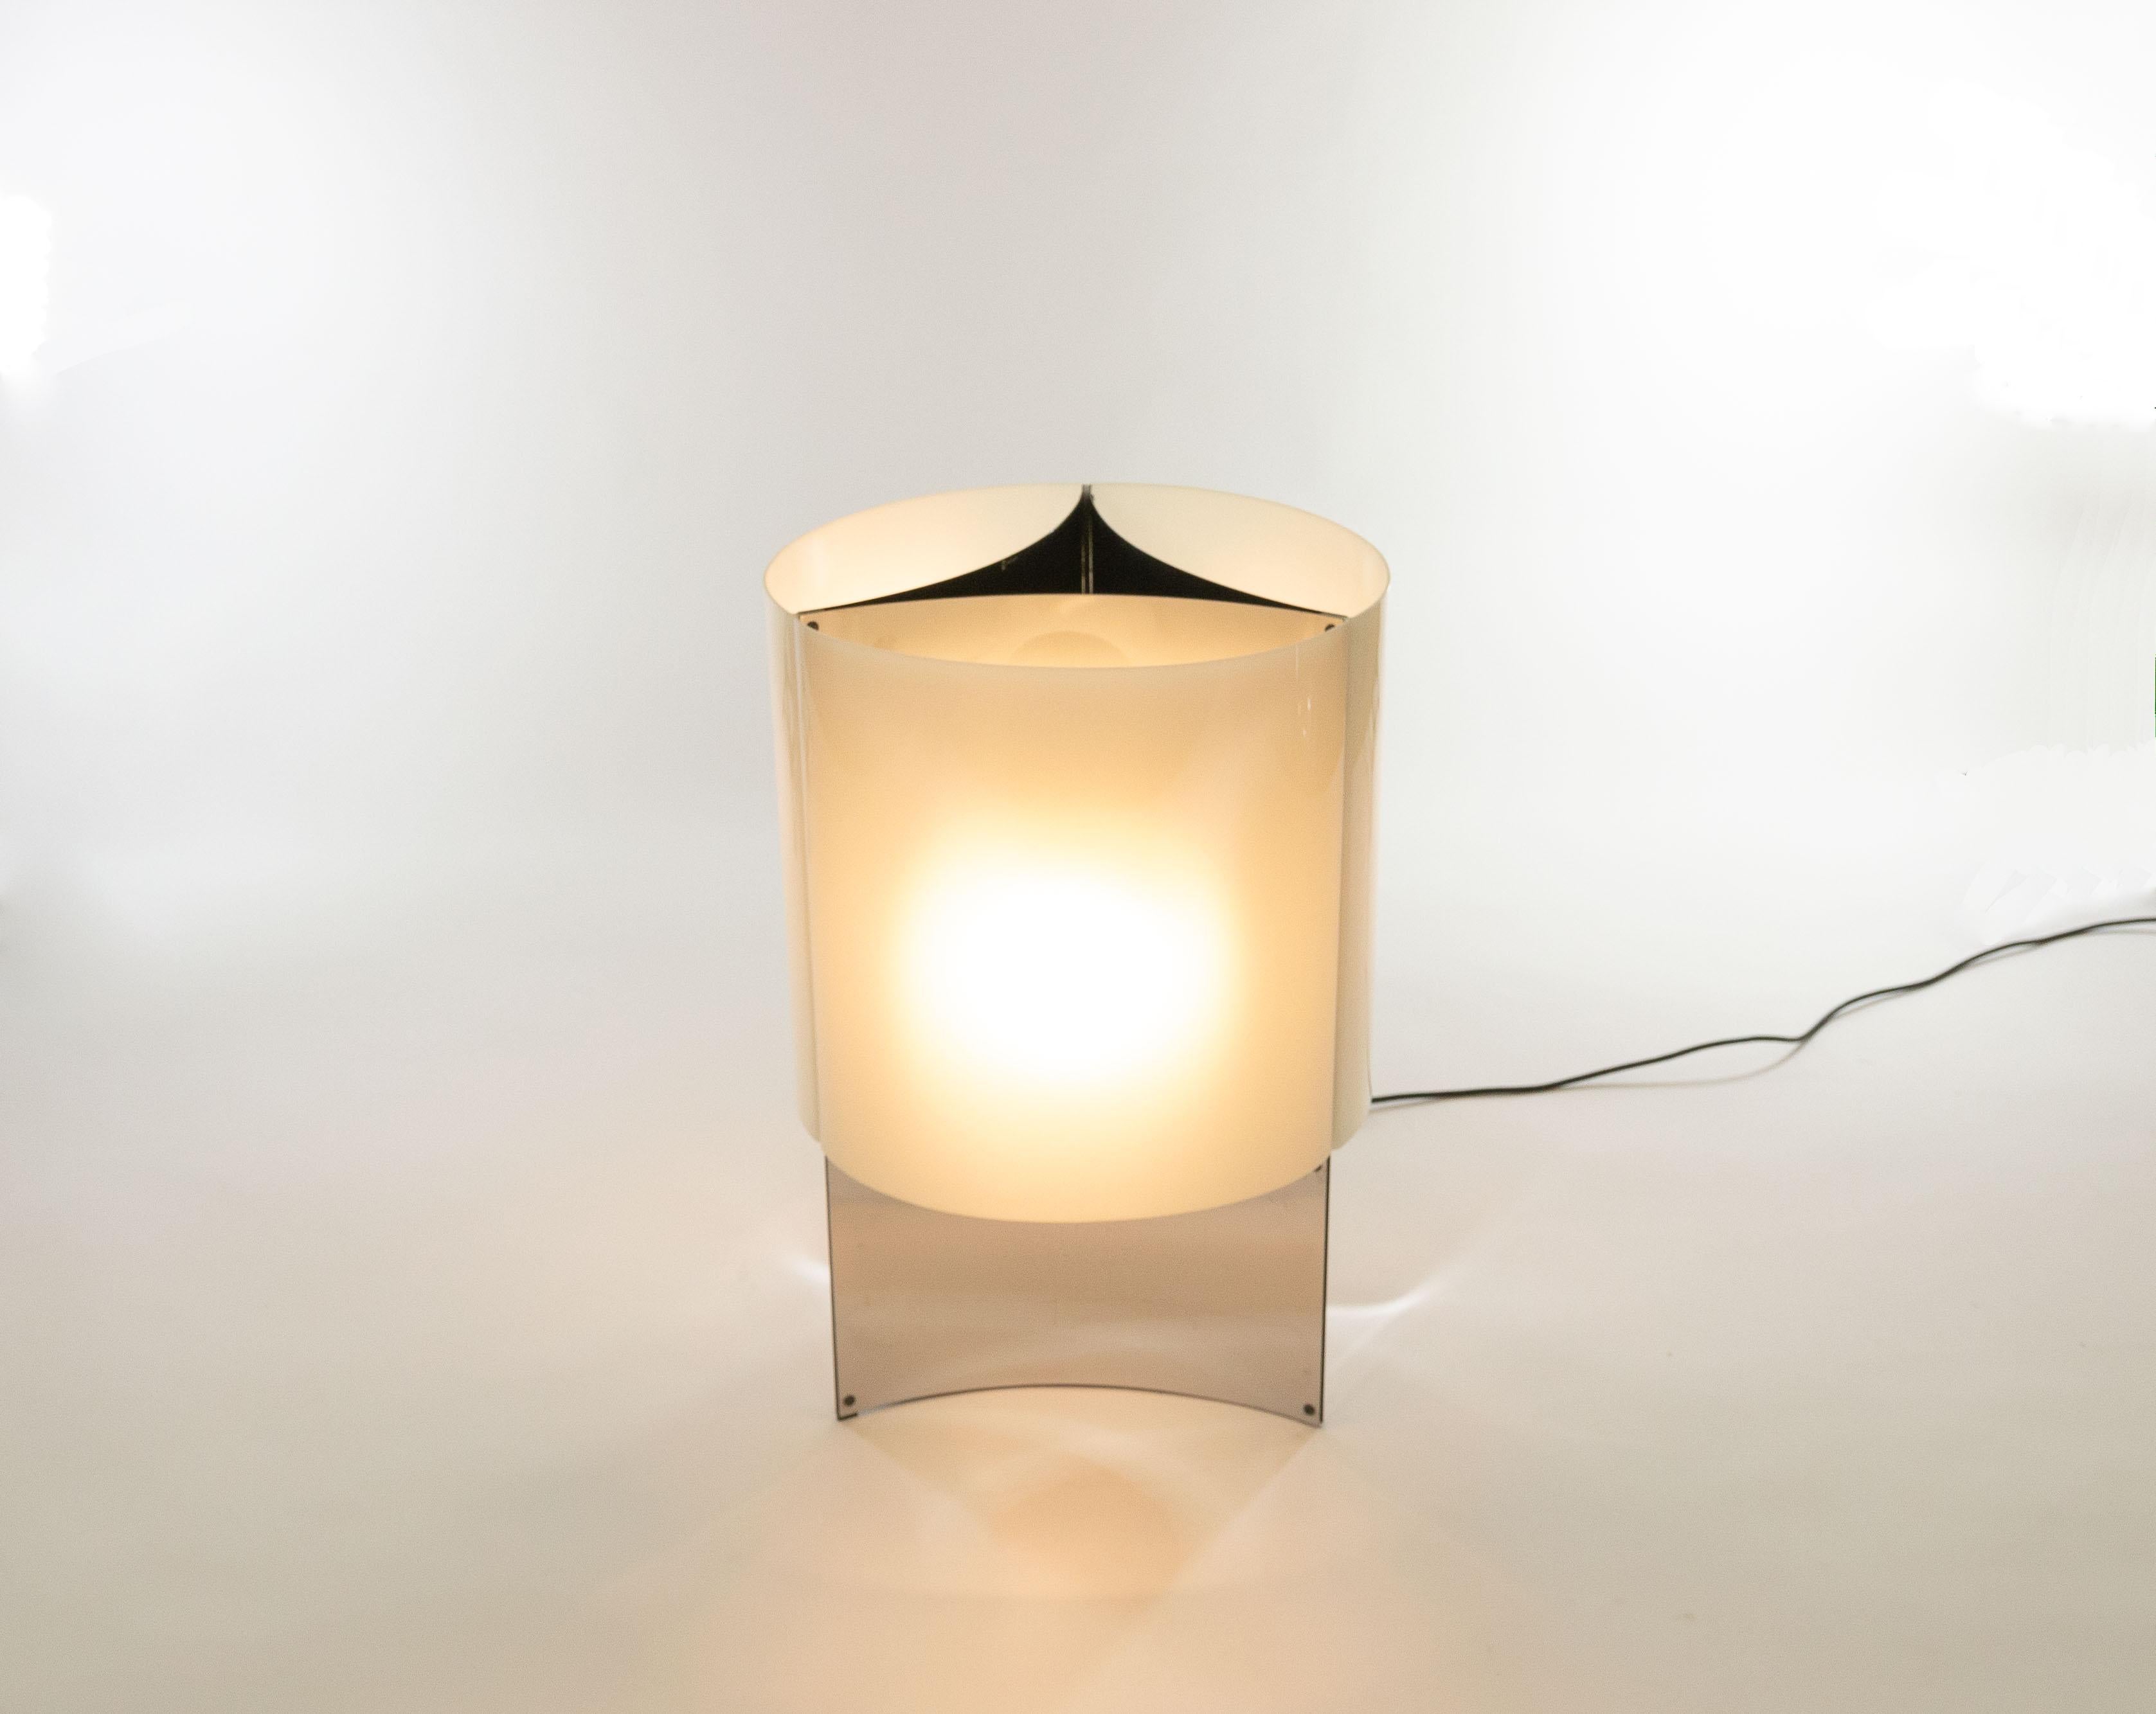 This elegant lamp model 526/G was designed in 1965 by Massimo Vignelli for Italian lighting manufacturer Arteluce.

Model 526/G is a table or floor lamp with a base that consists of three concave chromed sheets. This base is covered by white